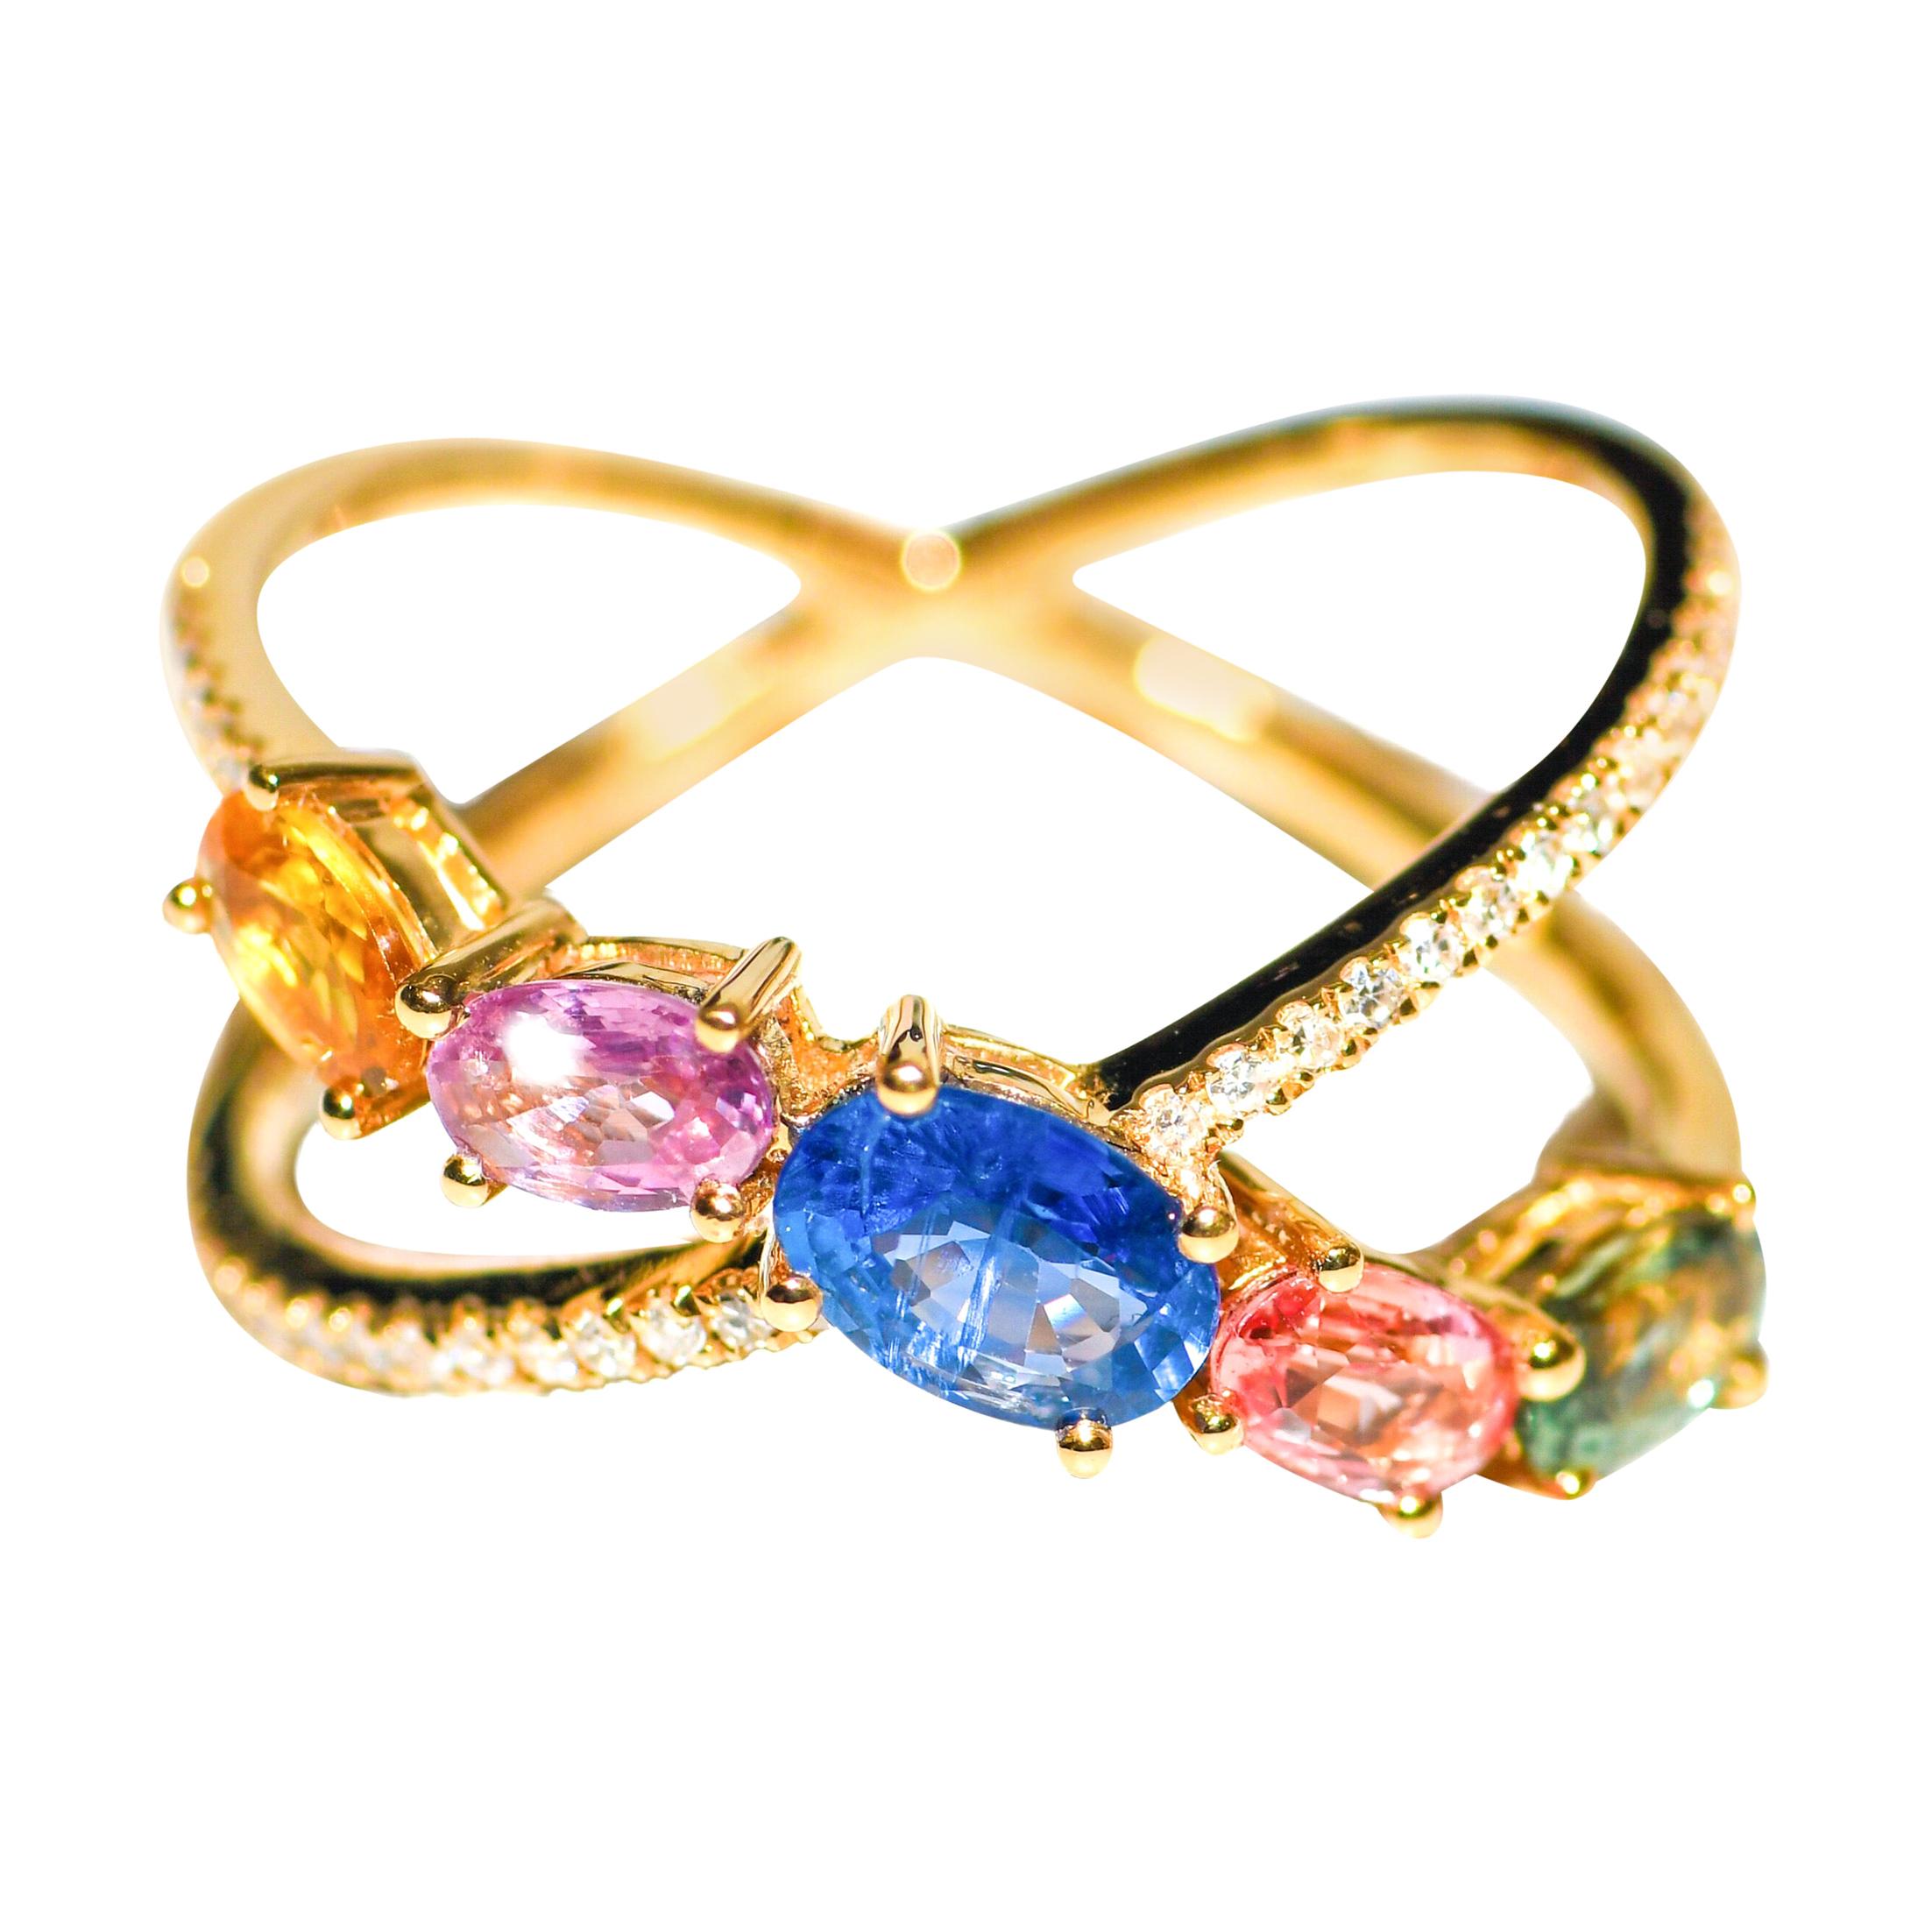 Kantis 18 Karat Criss Cross Ring with Diamonds and Sapphires For Sale